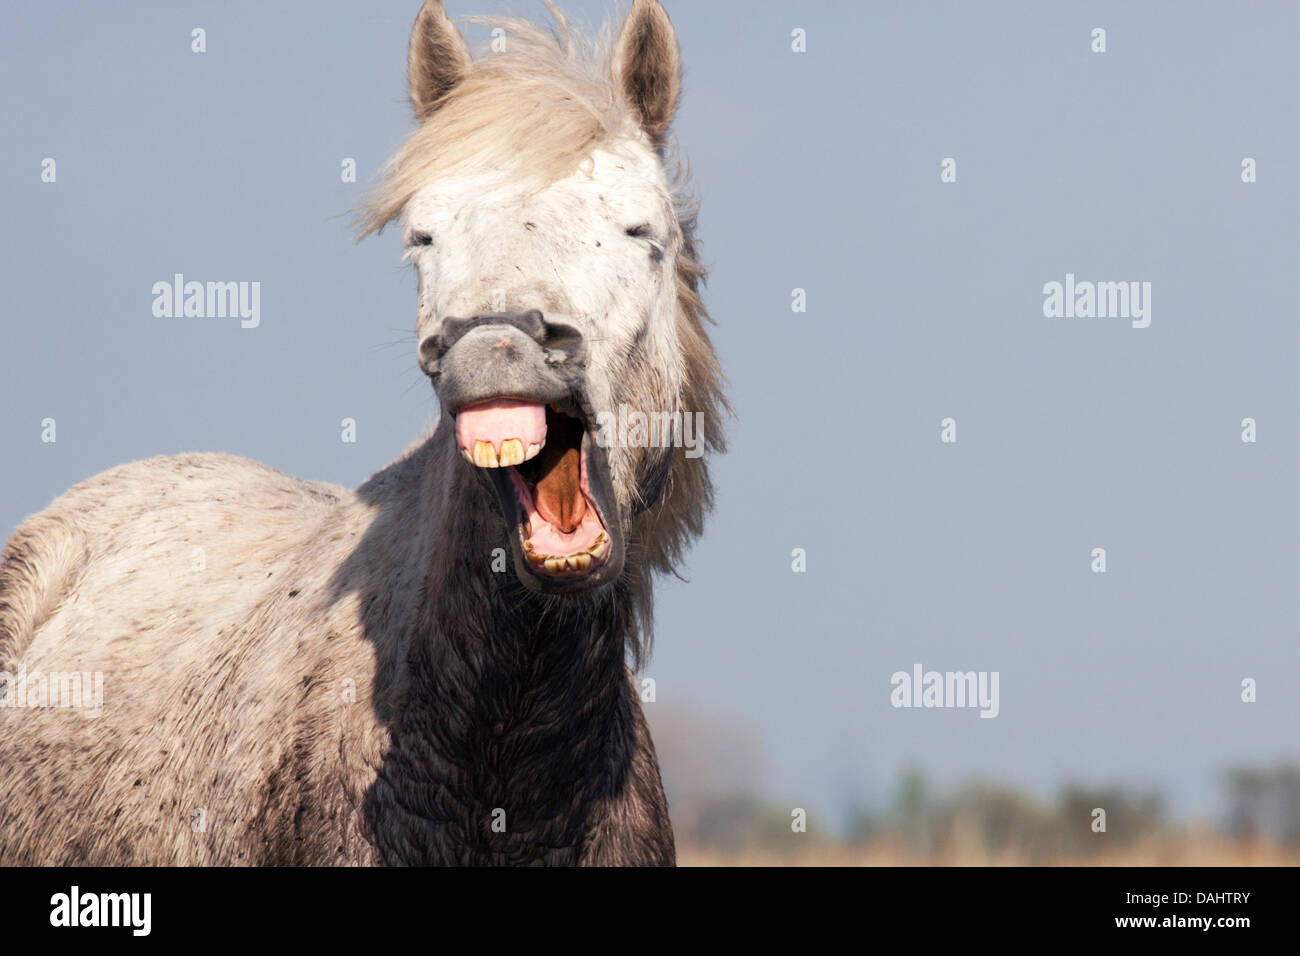 Horse making funny face and showing teeth Stock Photo